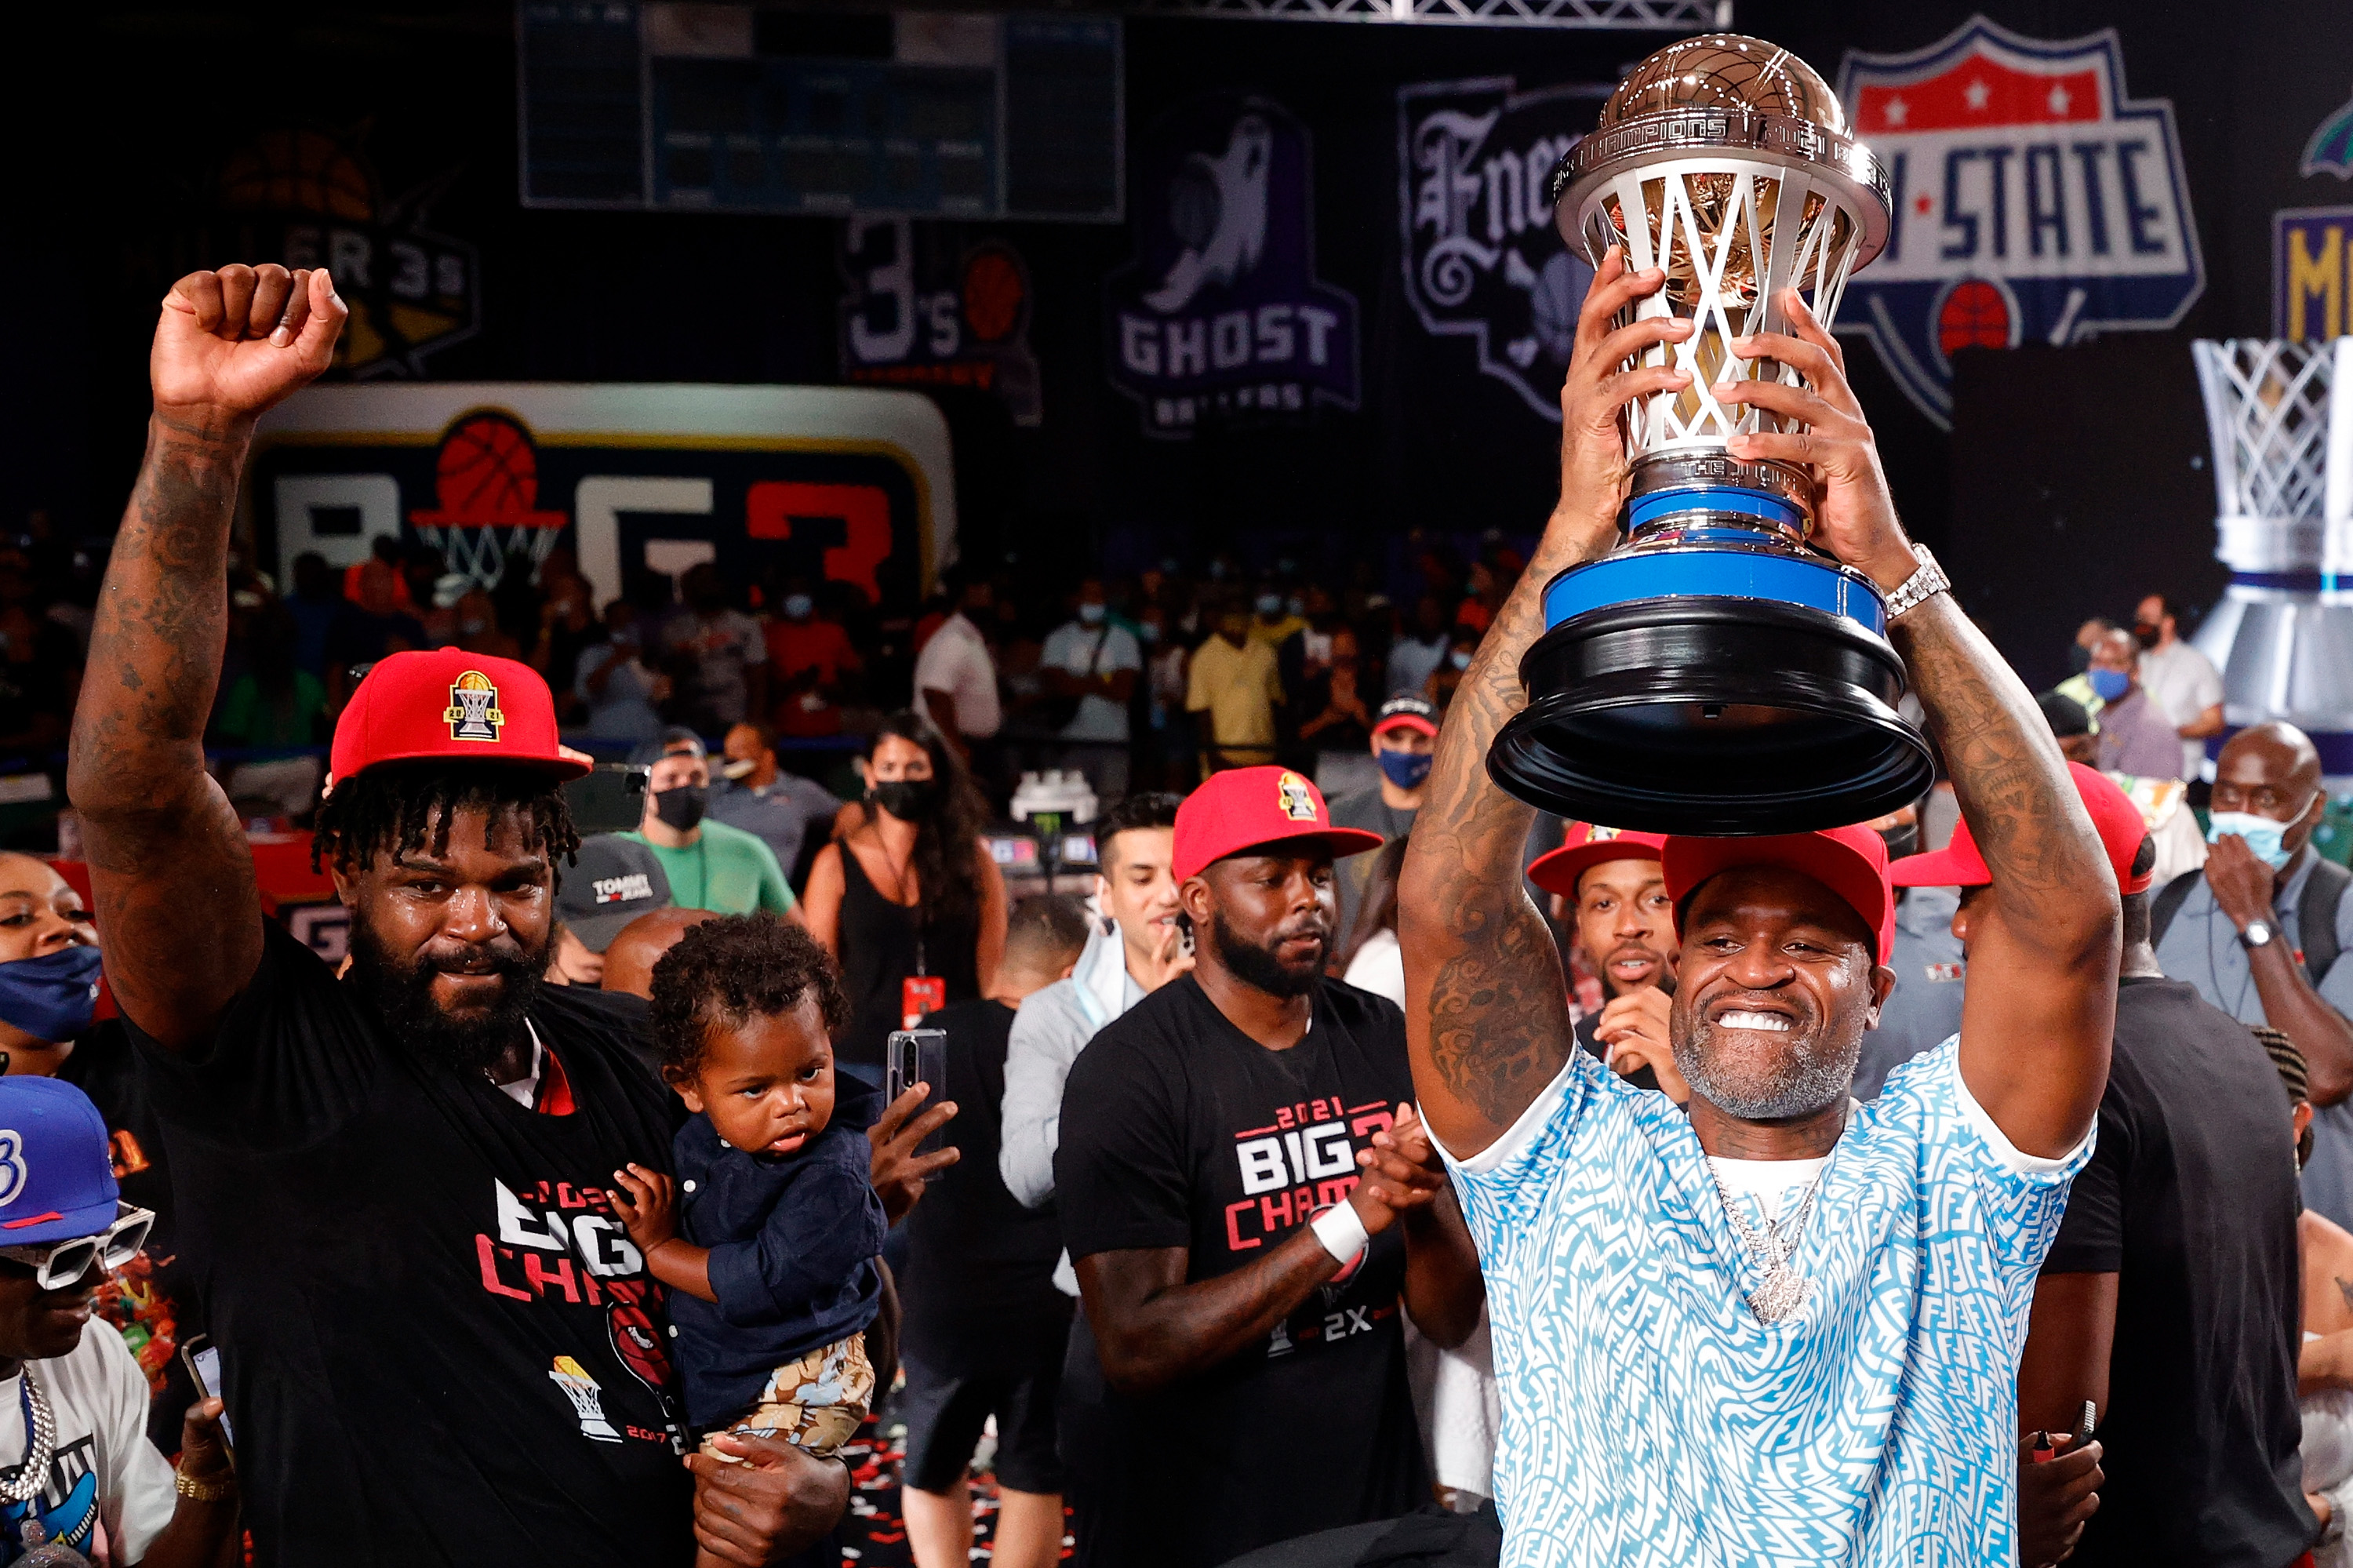 Stephen Jackson Reacts After Trilogy Win BIG3 Title In Epic Fashion